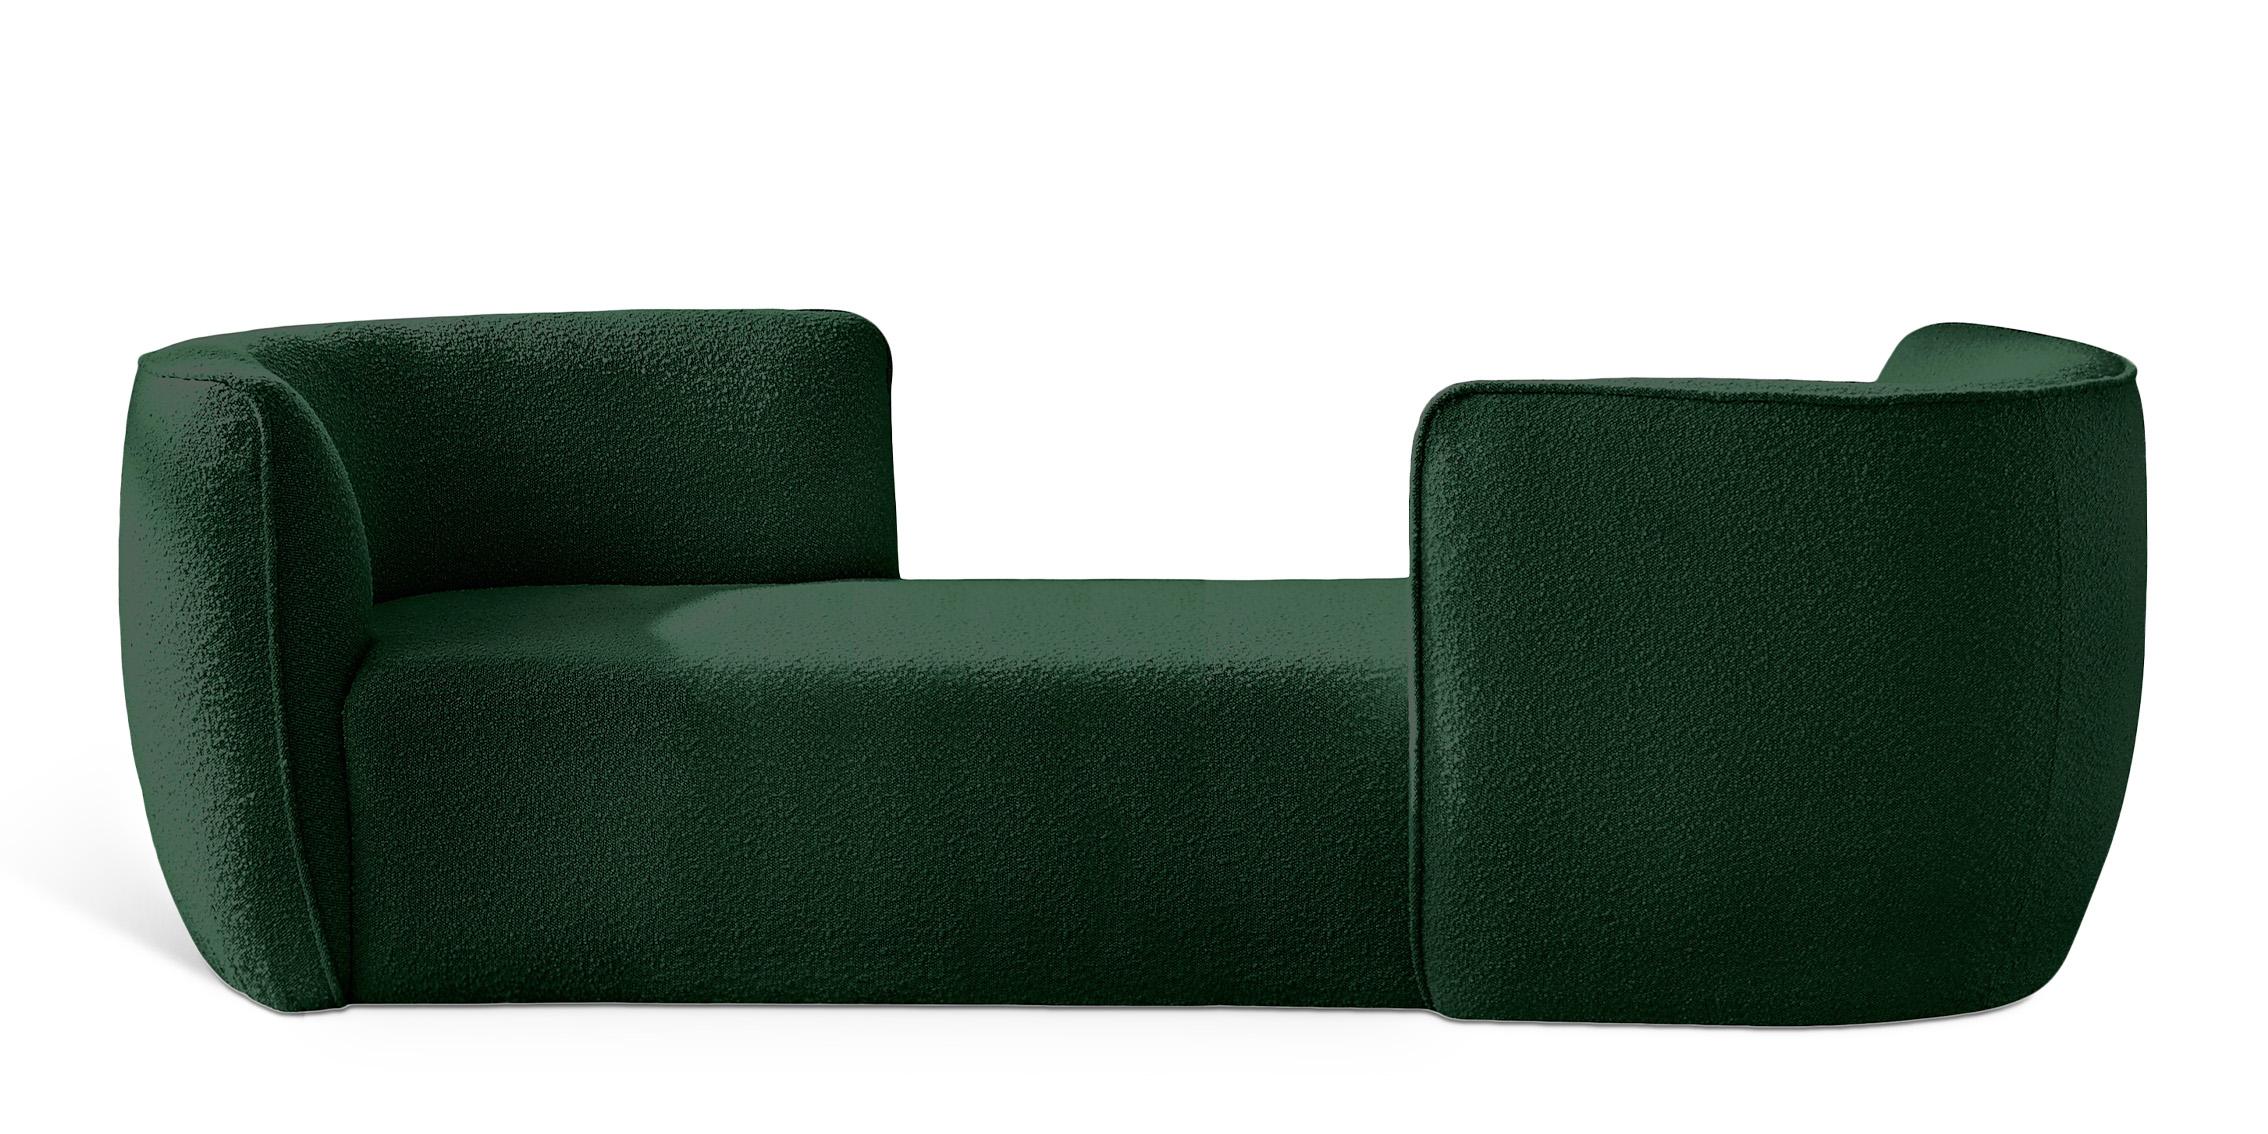 Contemporary Chaise Lounge HILTON 158Green 158Green in Green 